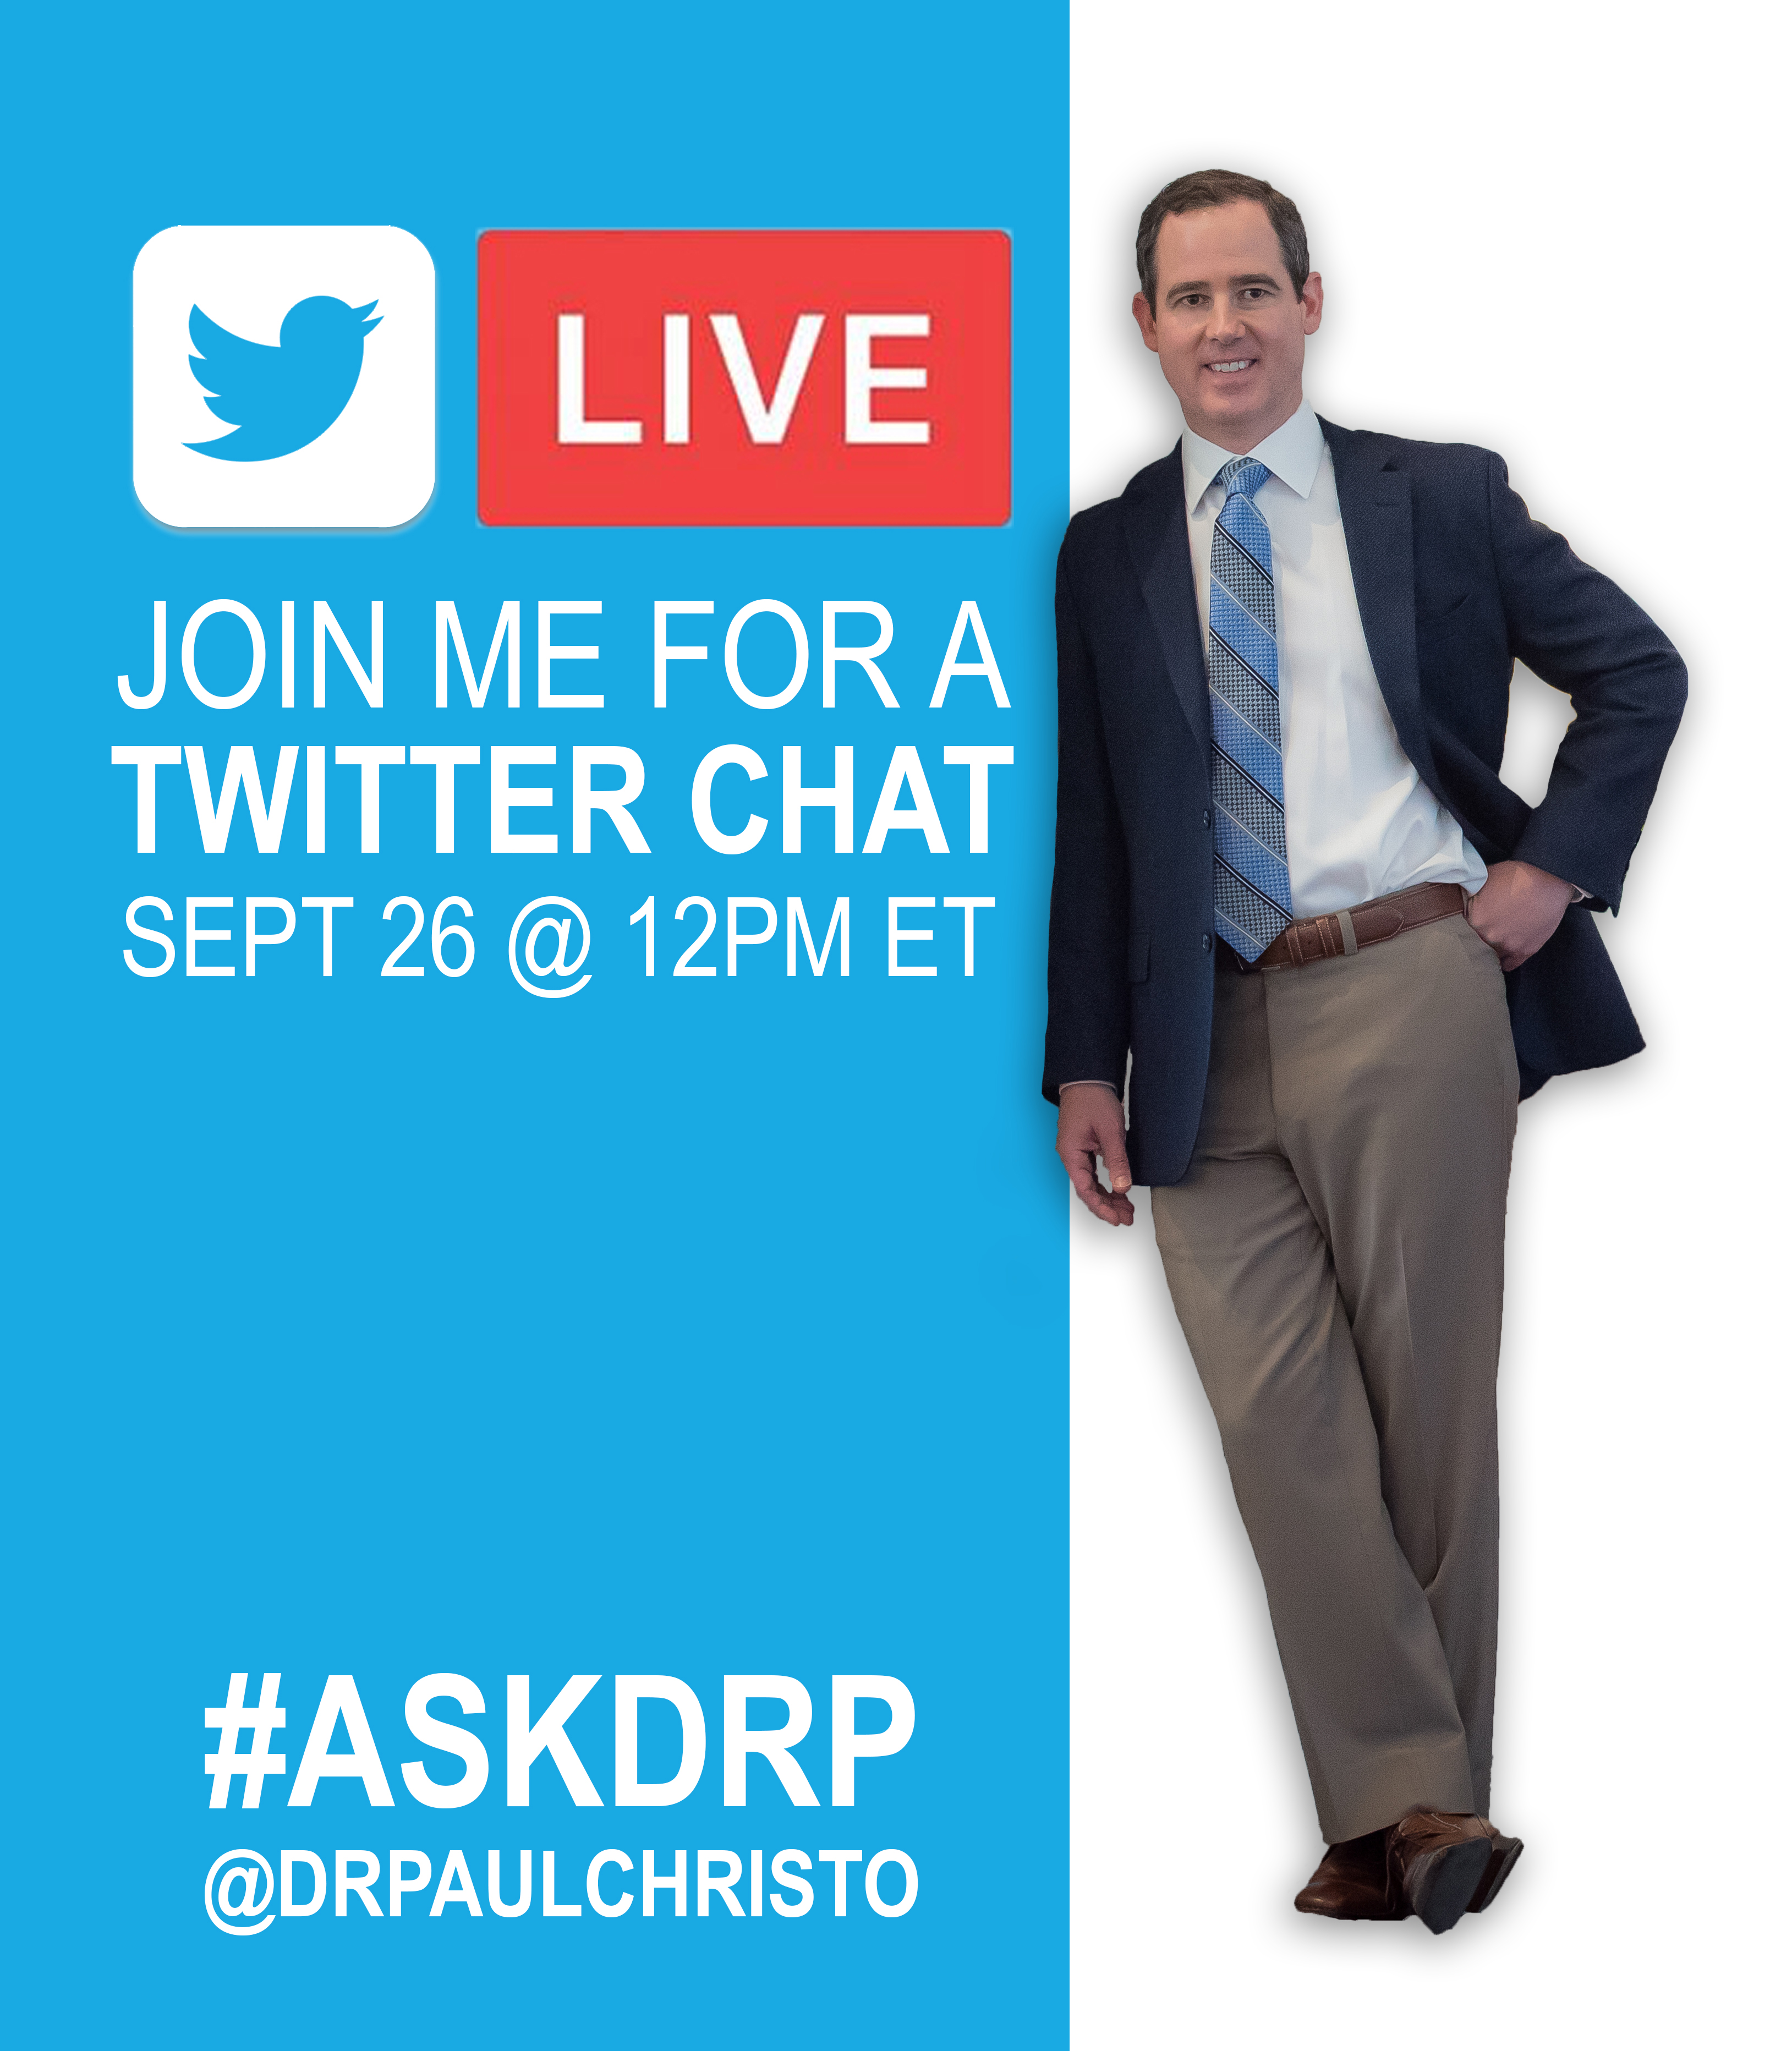 #AskDrP – Submit Your Questions